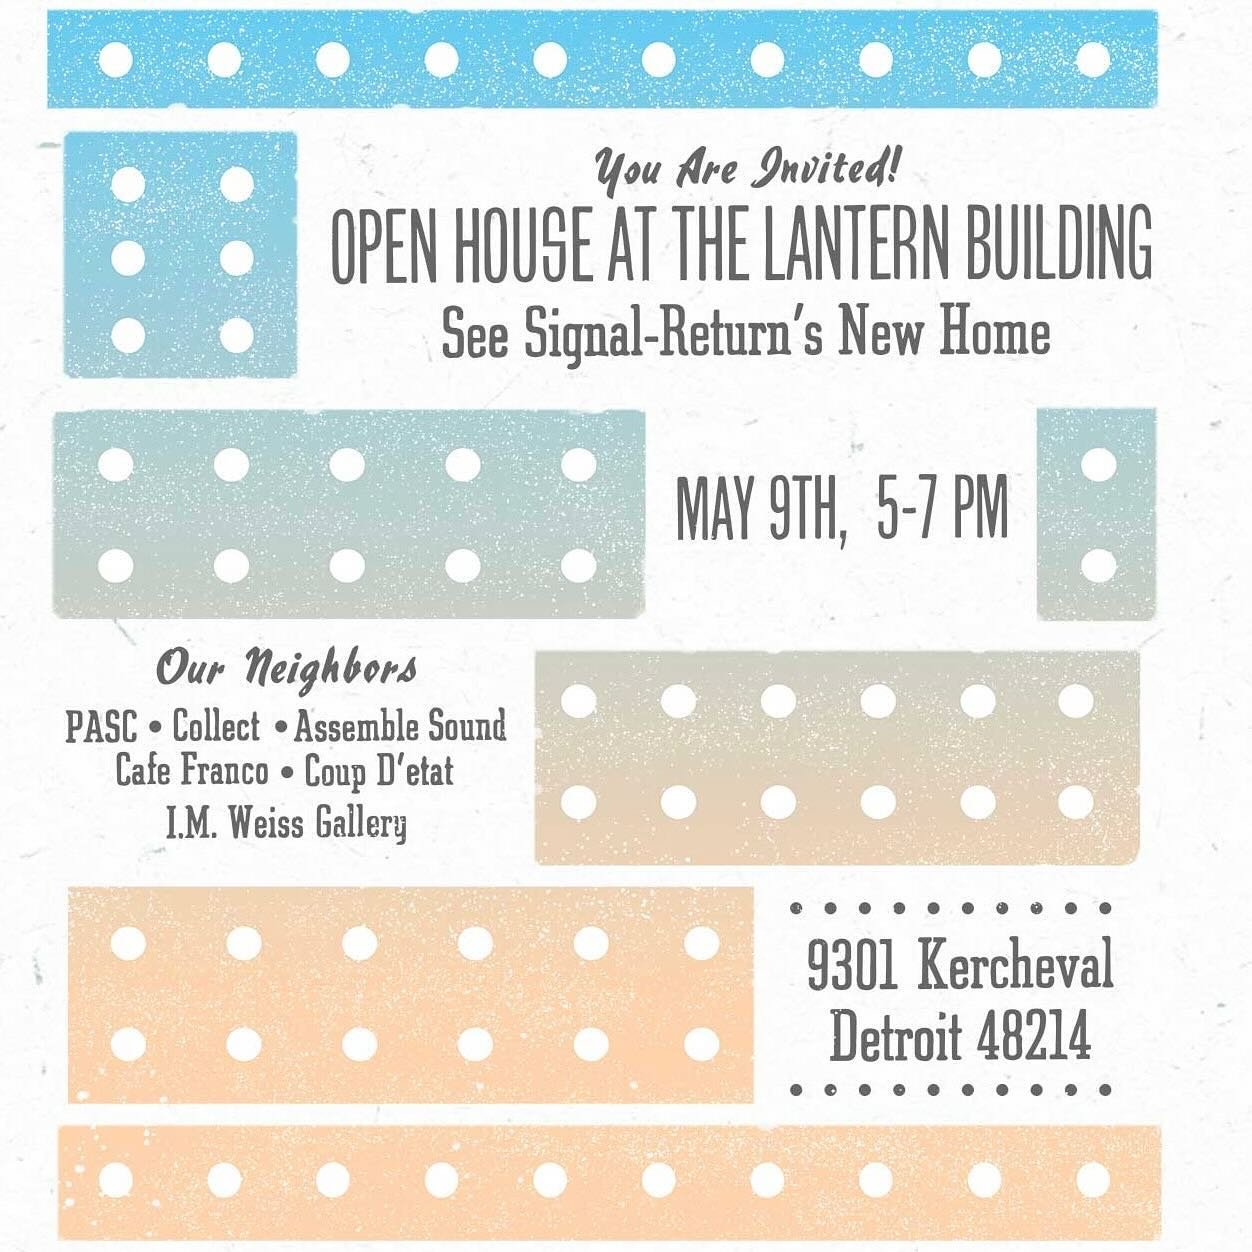 Come visit us at @lanterndetroit on May 9th! Presses in Action! All ages welcome! New products and a free print with purchase available!